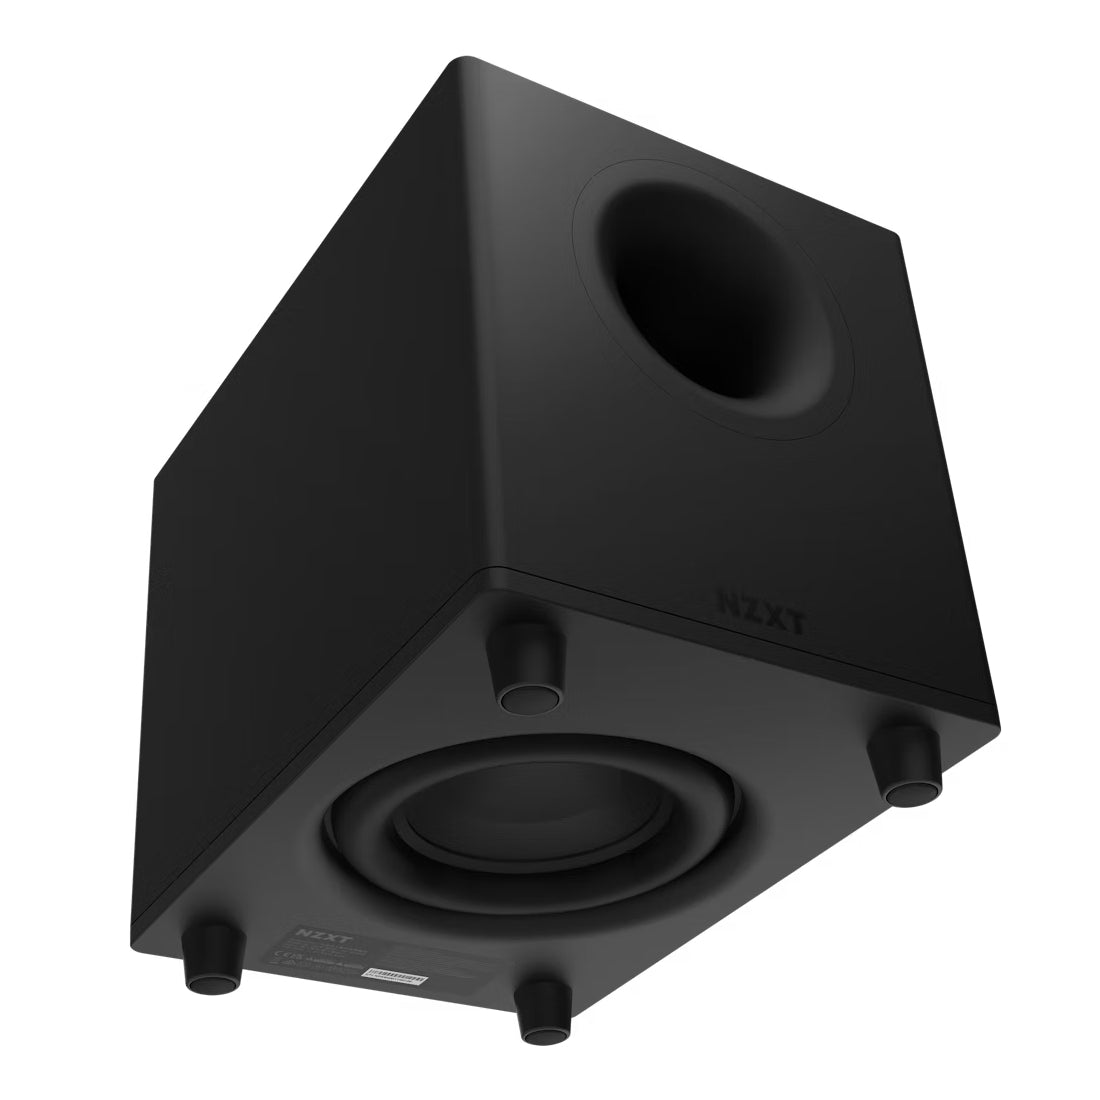 NZXT Relay Subwoofer & Relay Speakers - Black - مكبرات صوت